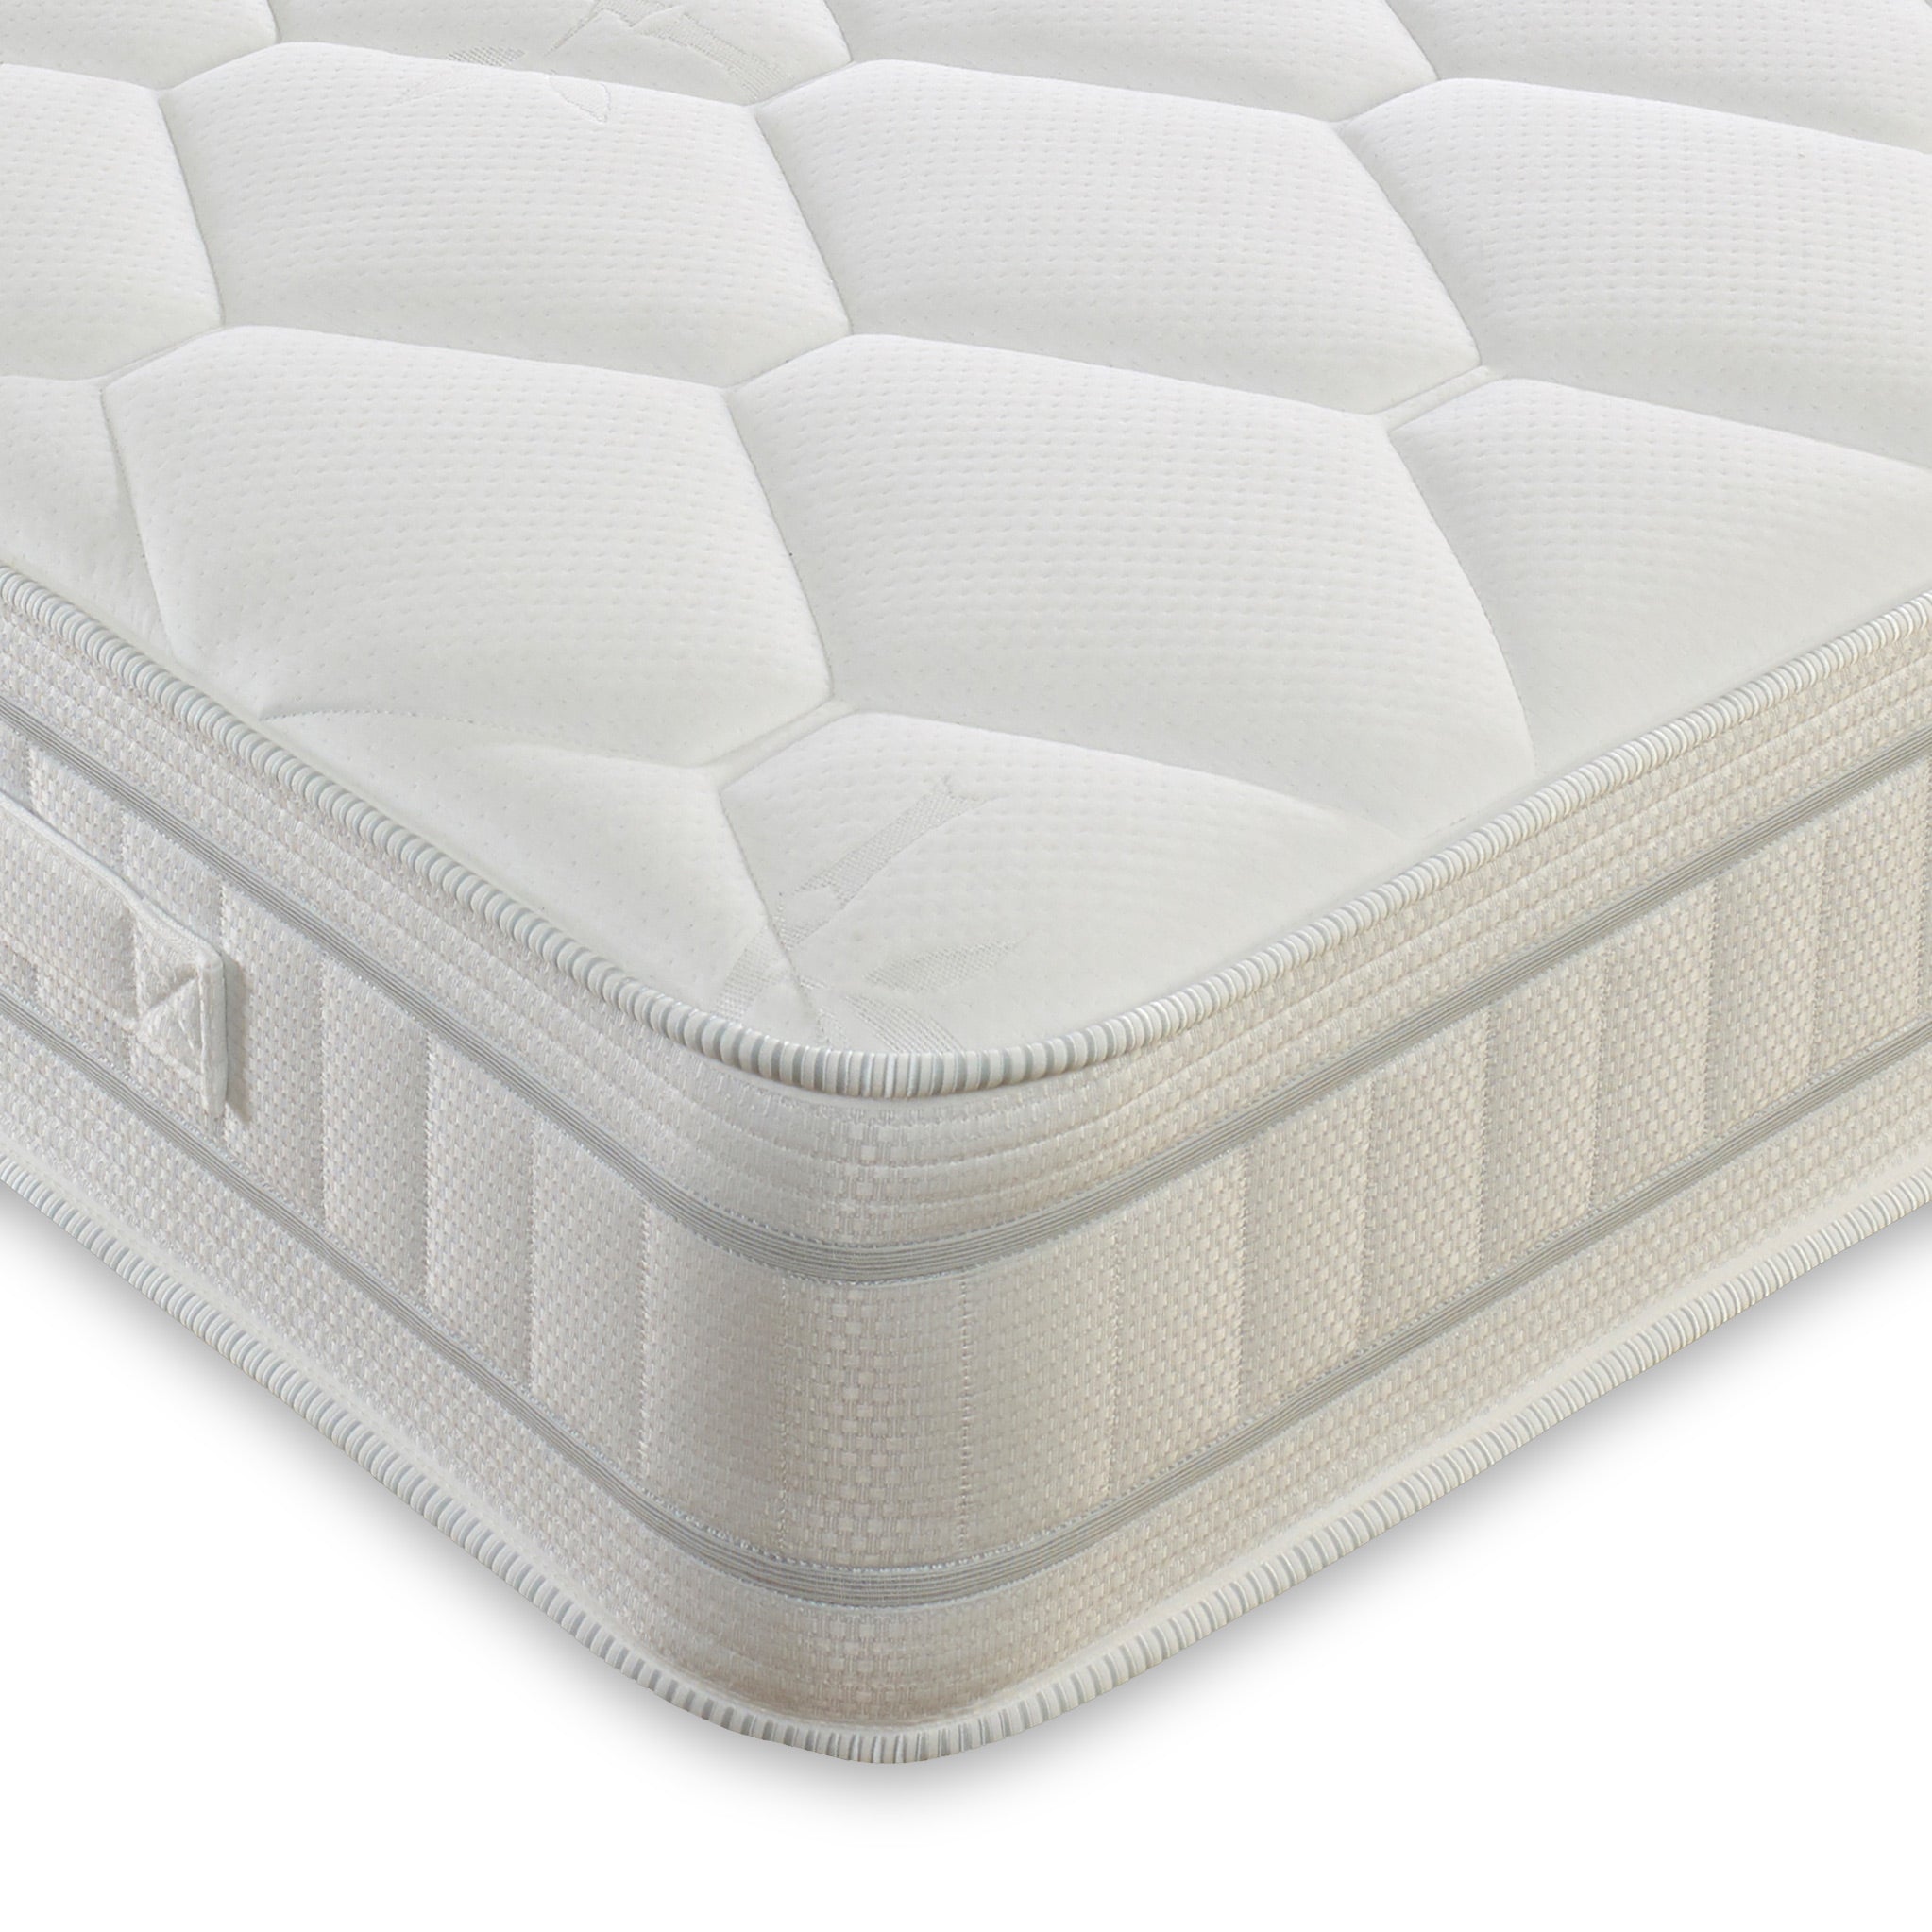 Simply Quilted Sprung Mattress Single Double King Super King